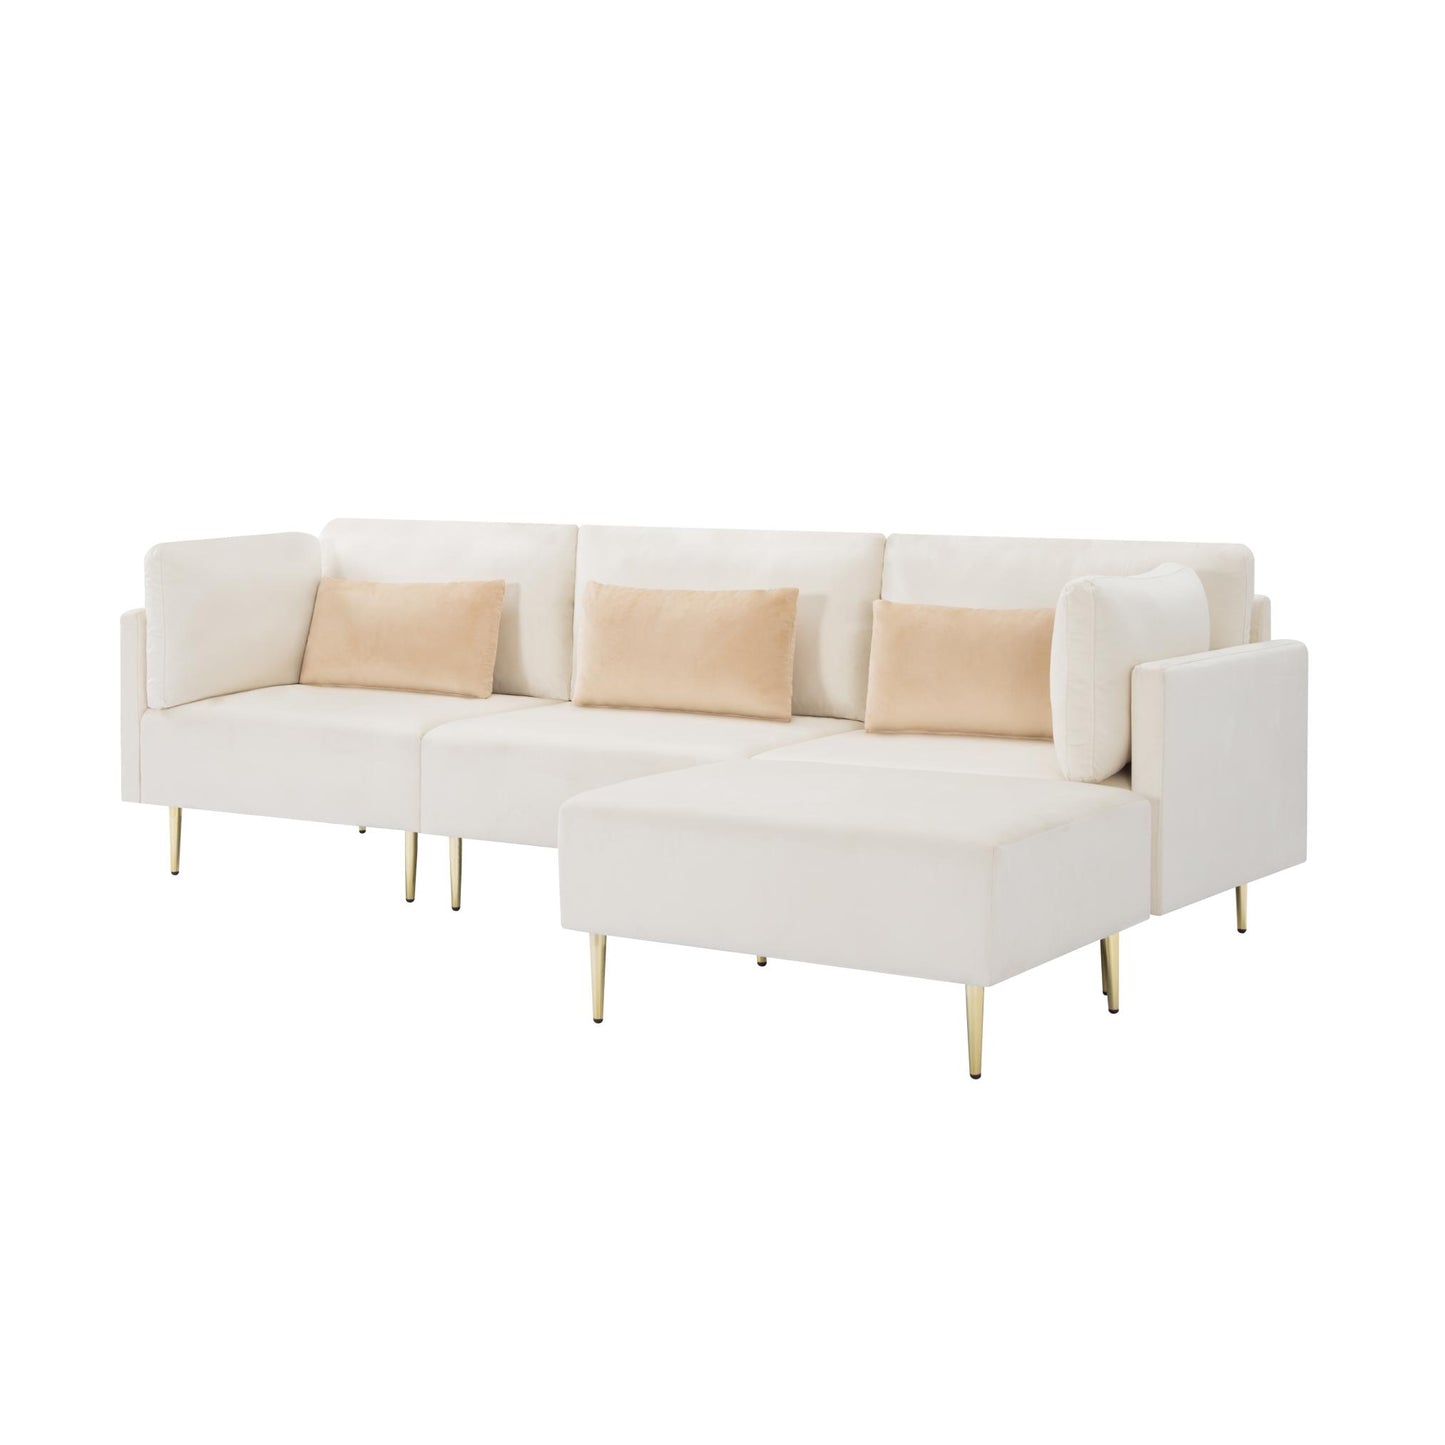 105” L Shaped Sectional Sofa with ottoman